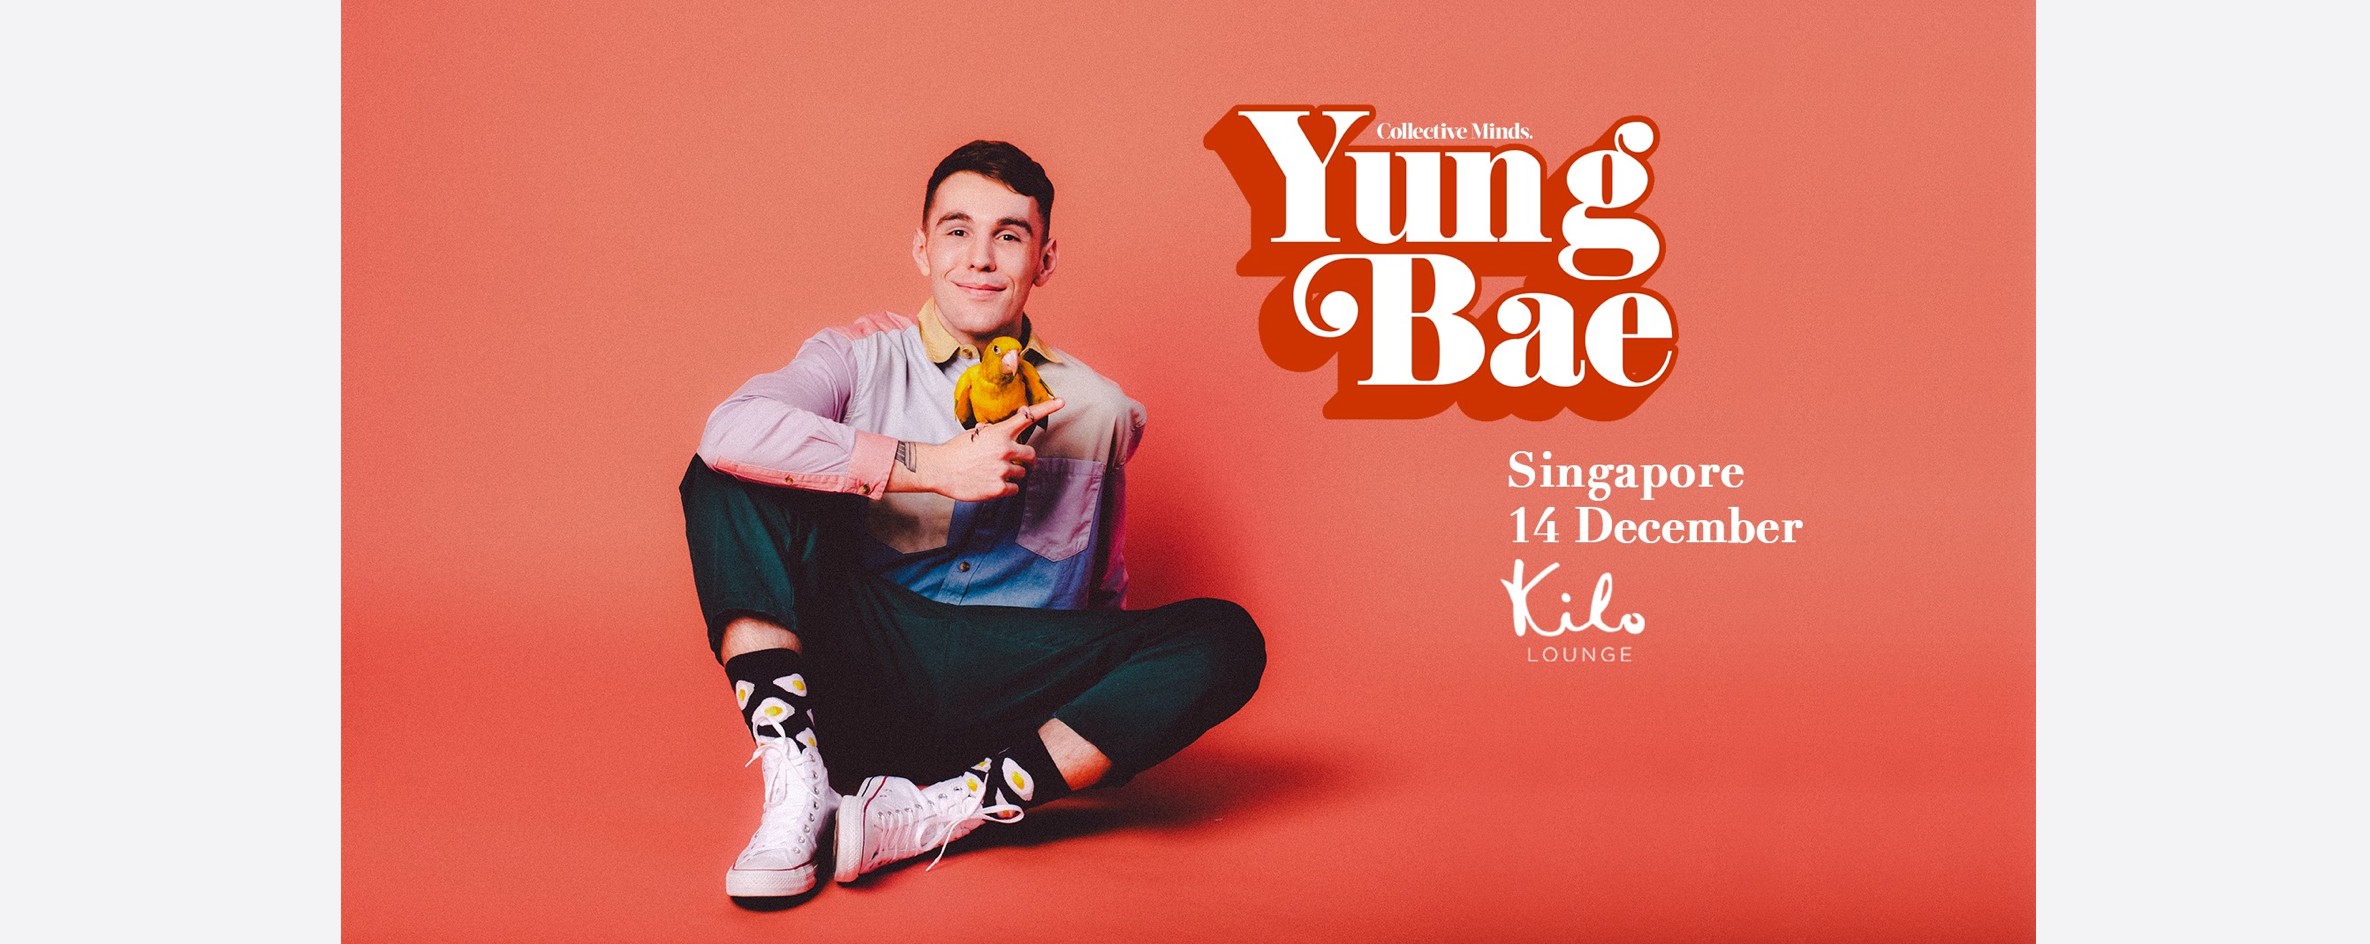 Yung Bae presented by Collective Minds x Kilo Lounge